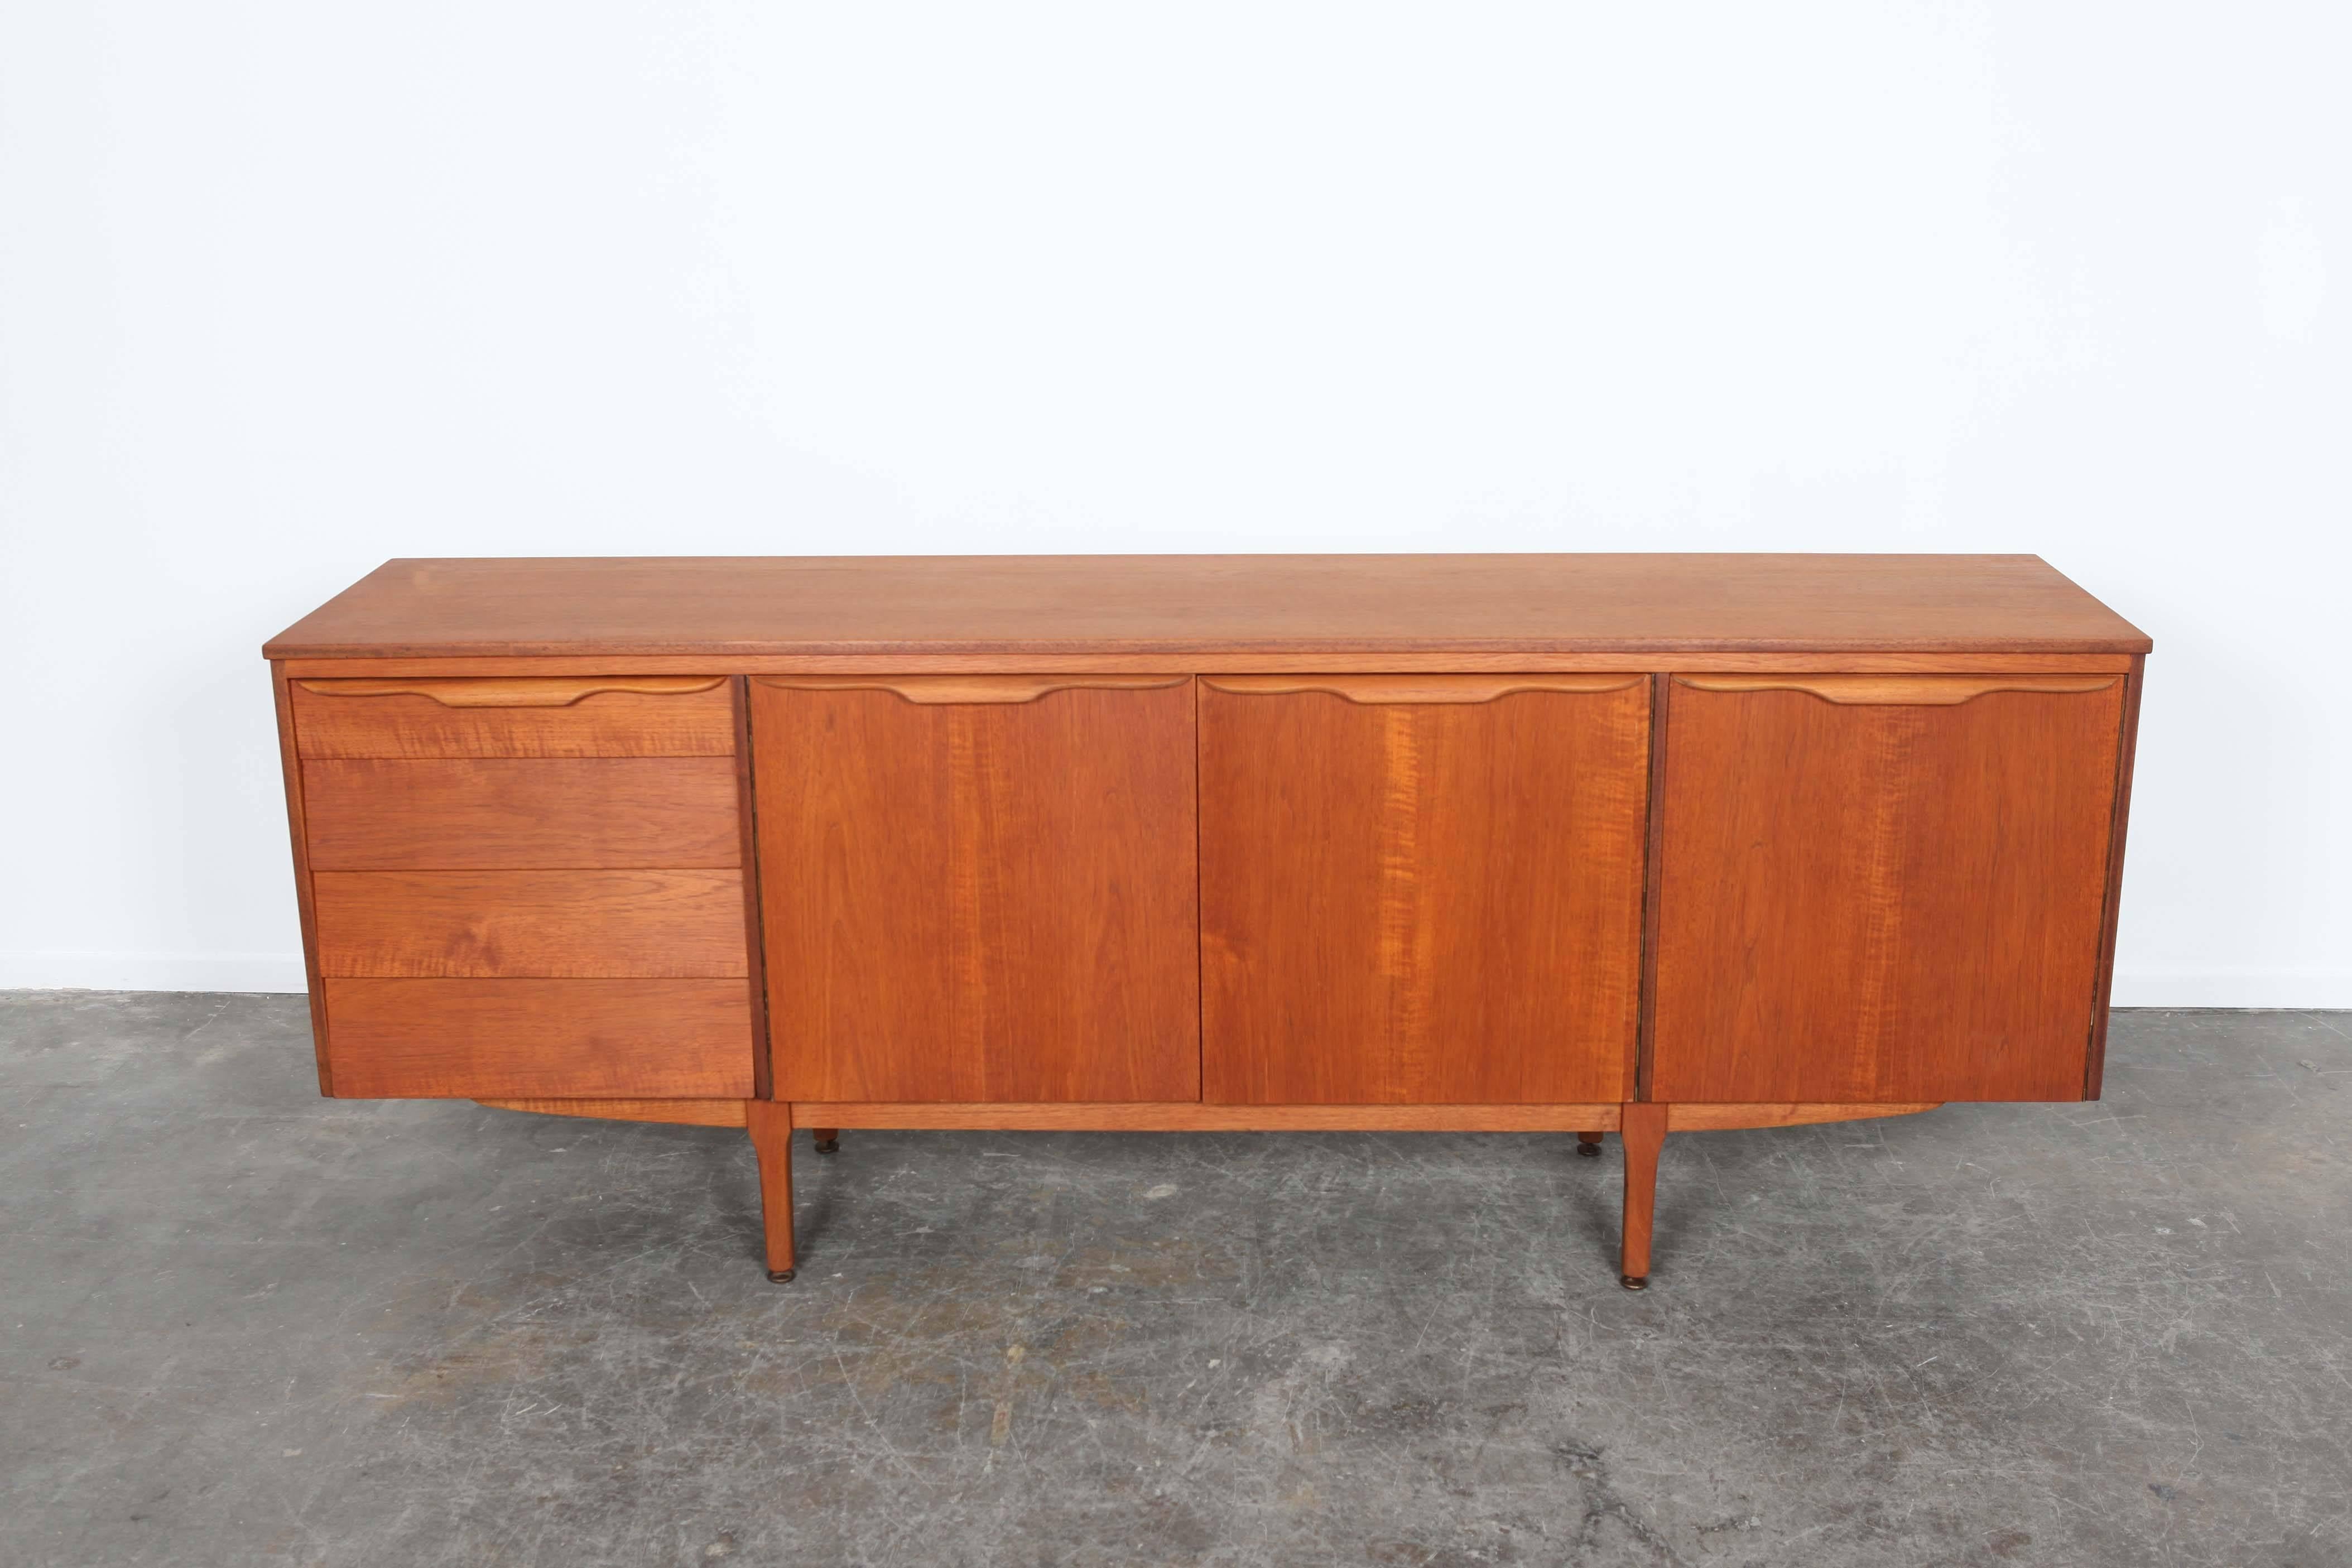 Teak four-drawer sideboard from England. One large center compartment and one smaller compartment with shelf. Front of drawers are angled. Newly refinished.